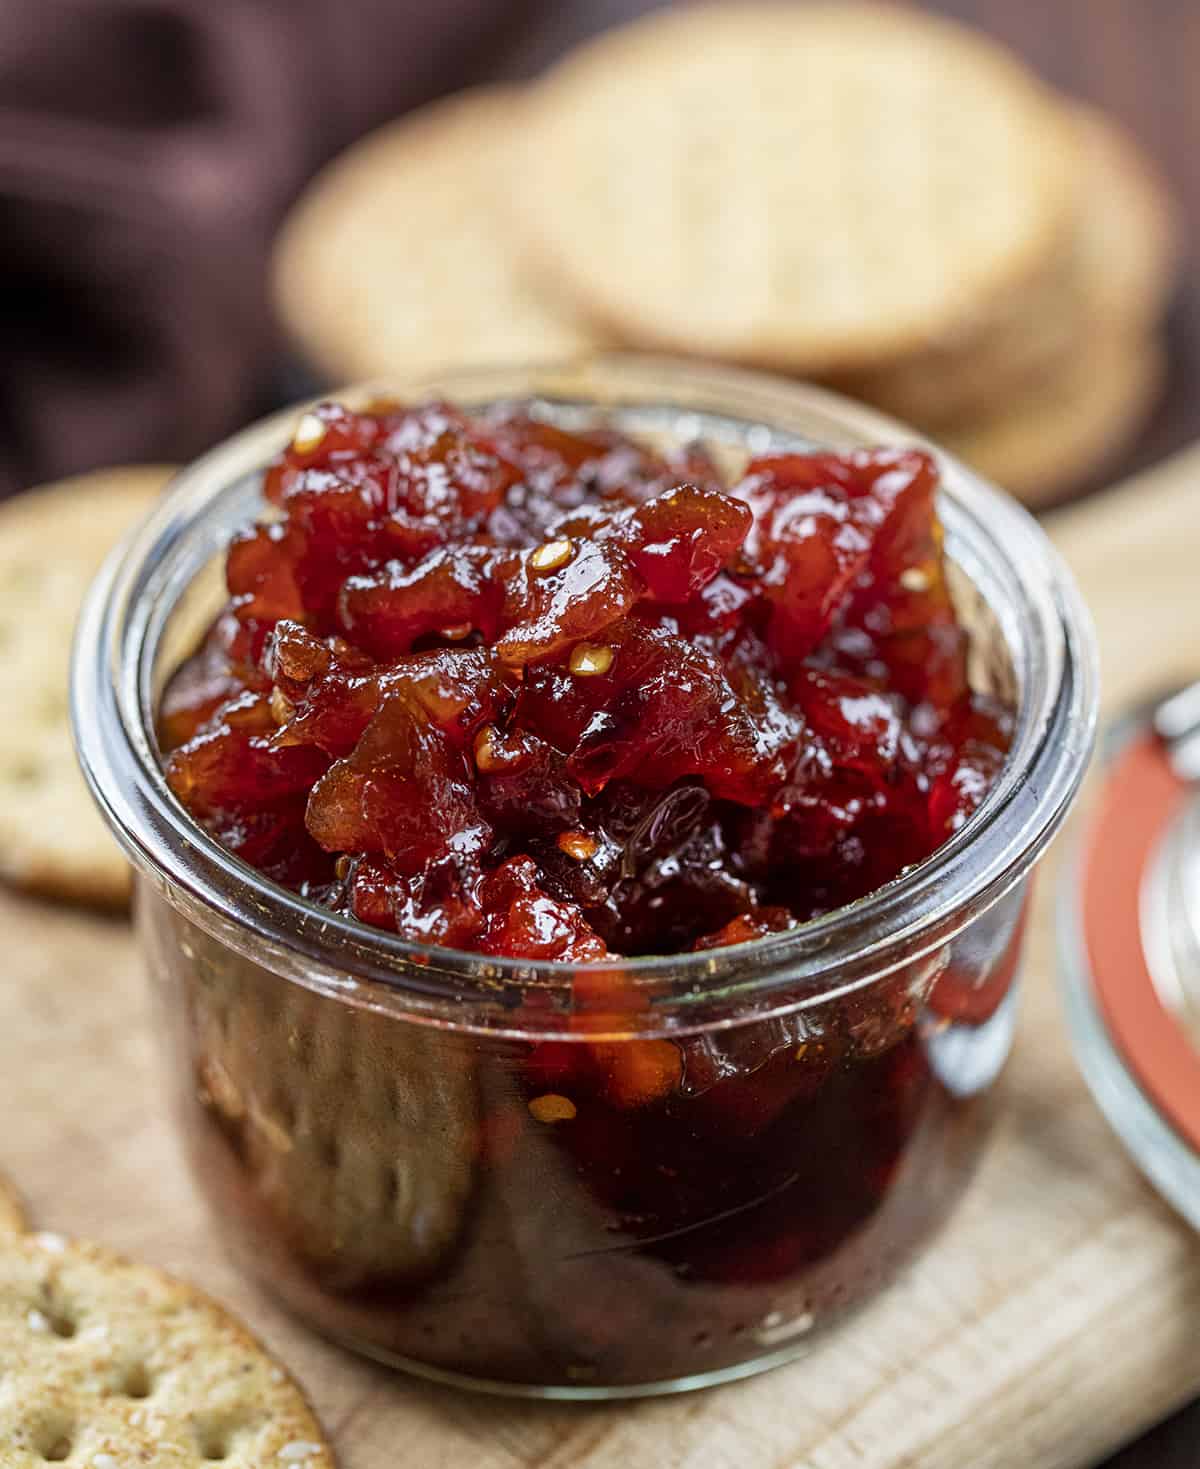 Jar of Spicy Tomato Jam on a Cutting Board. Appetizer, Burger Topping Idea, Tomato Jam, How to Make Tomato Jam, Spicy Jam, Homemade Tomato Jam, How to Can Tomato Jam, Cracker Spreads, Super Bowl Food, Christmas Appetizers, Thanksgiving Appetizers, i am homesteader, iamhomesteader